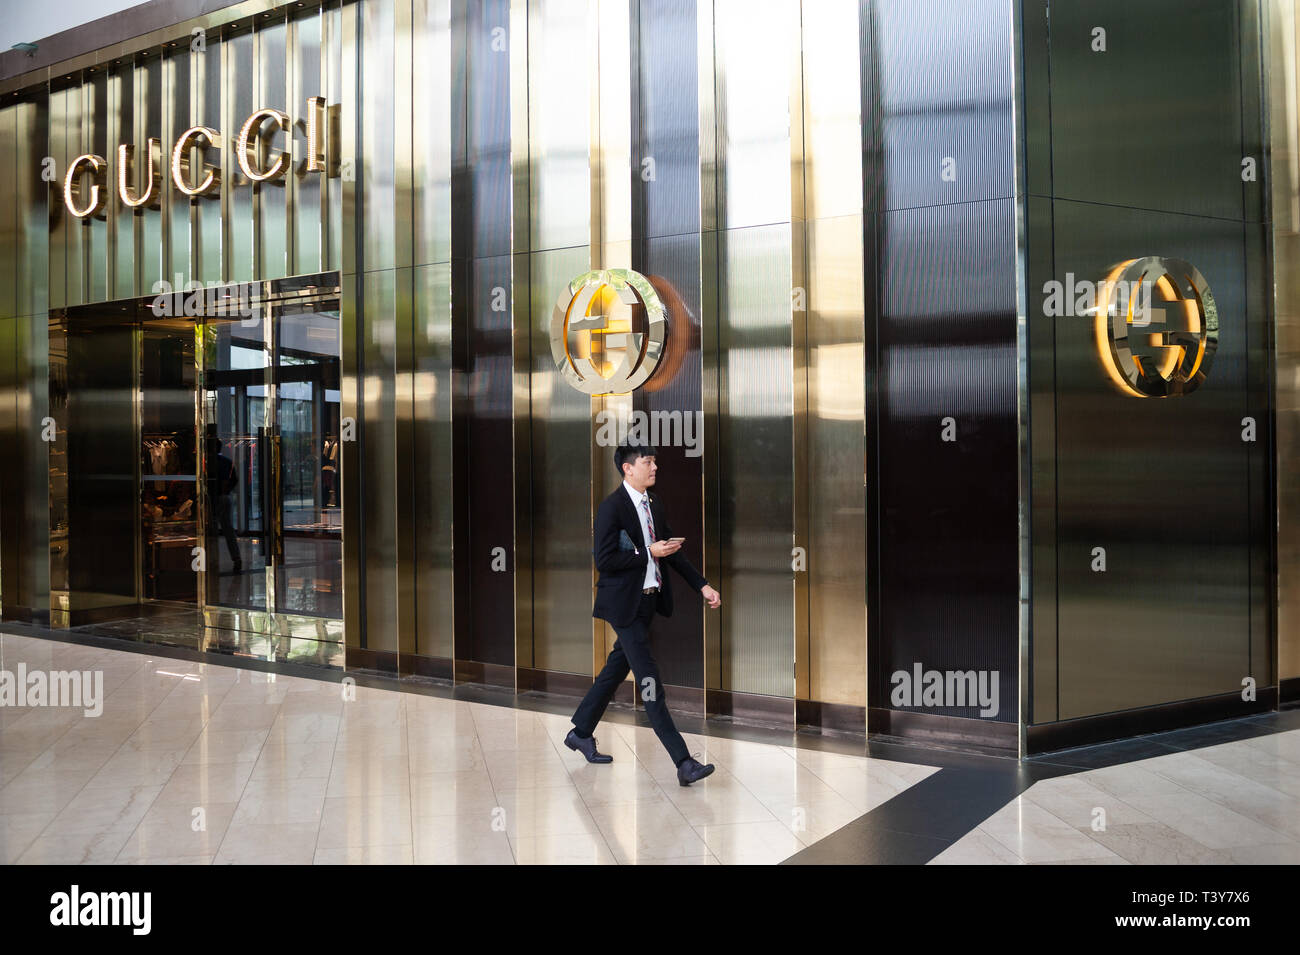 04.04.2018, Singapore, Republic of Singapore, Asia - A man is walking by a retail store of the Gucci fashion brand in 'The Shoppes' shopping mall. Stock Photo